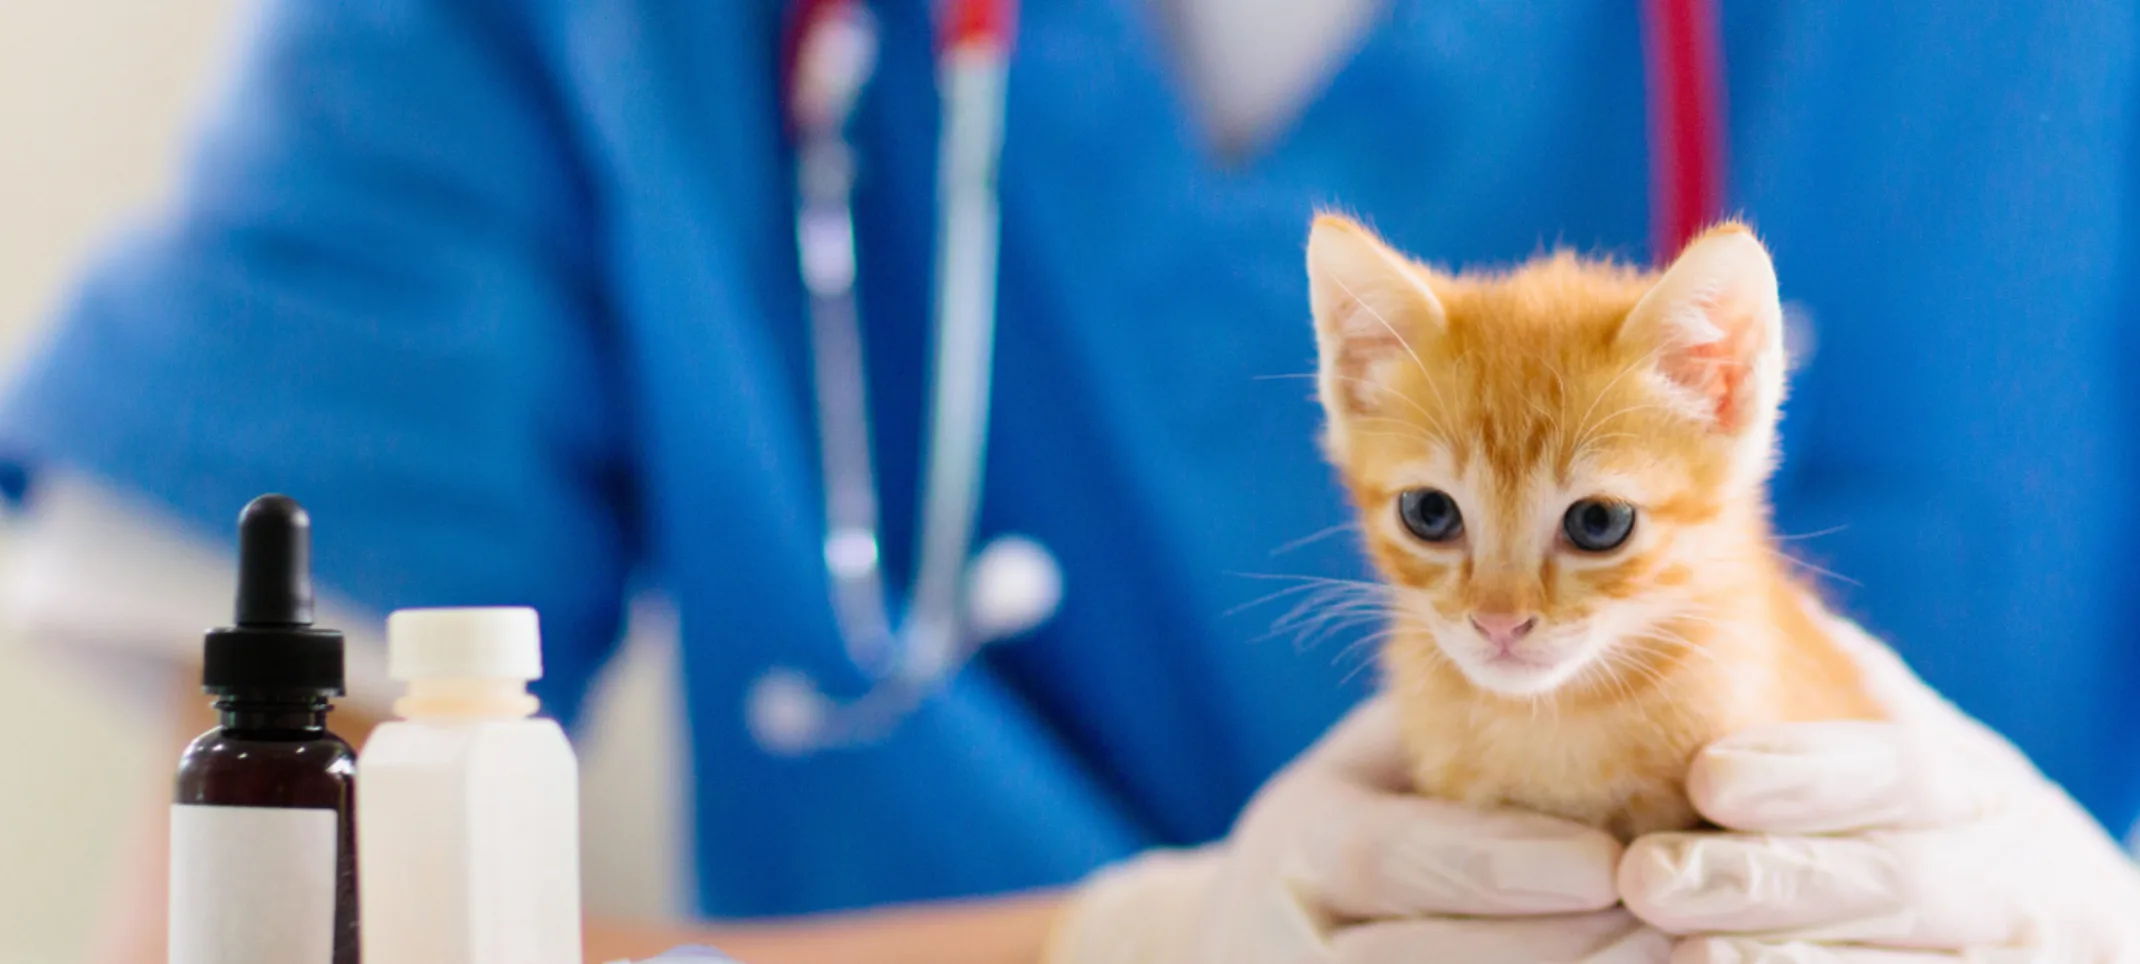 Close Up of Staff Holding Kitten Next to Medicine